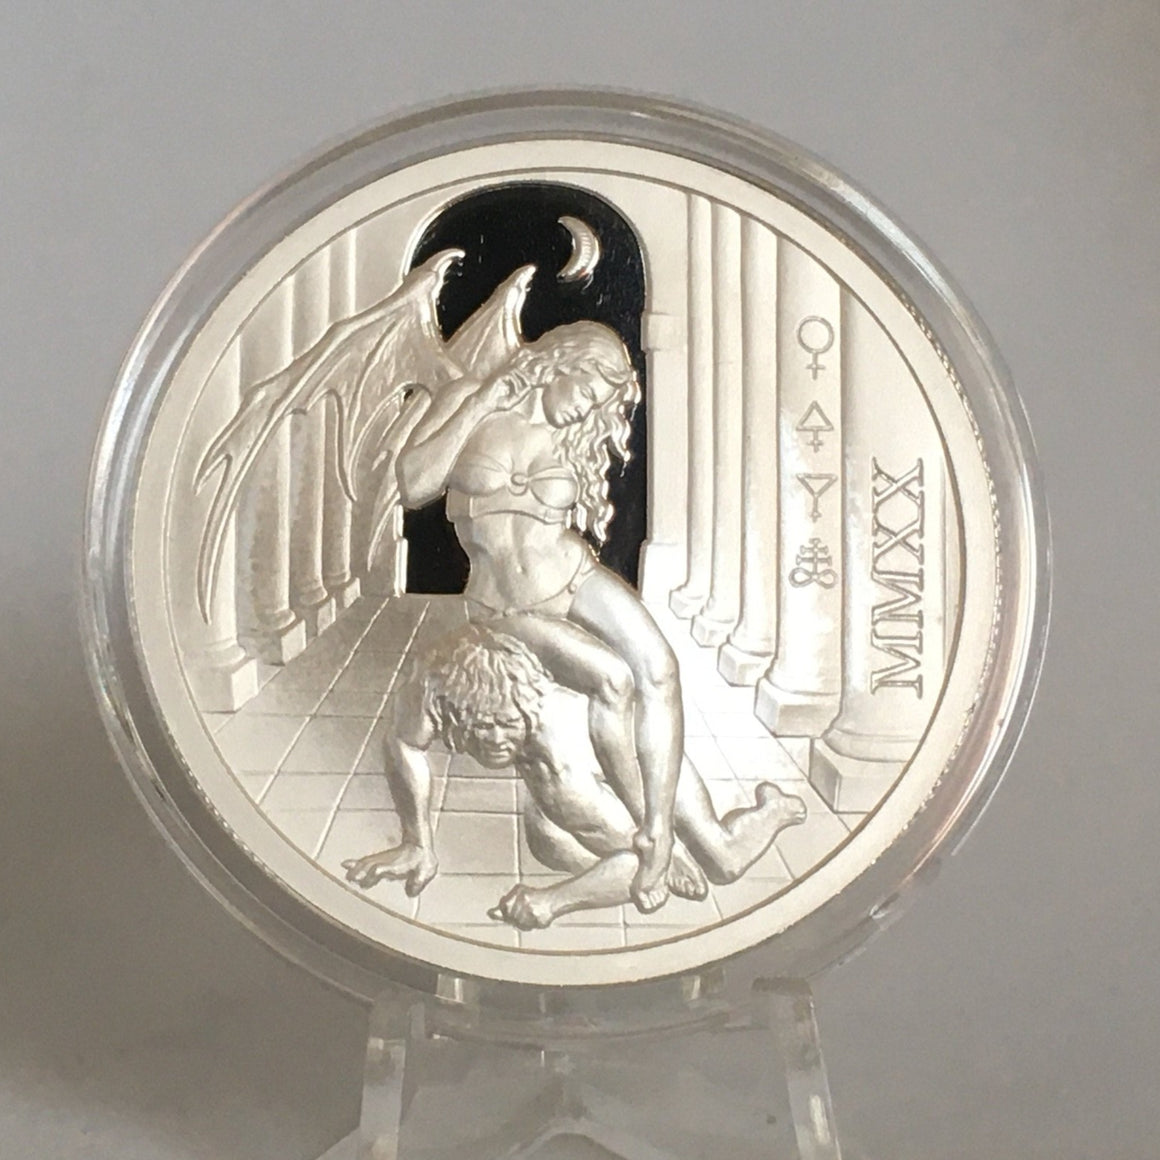 2020 Temptation of the Succubus - Proof Finish by Pheli Mint, 2oz .999 Fine Silver Round